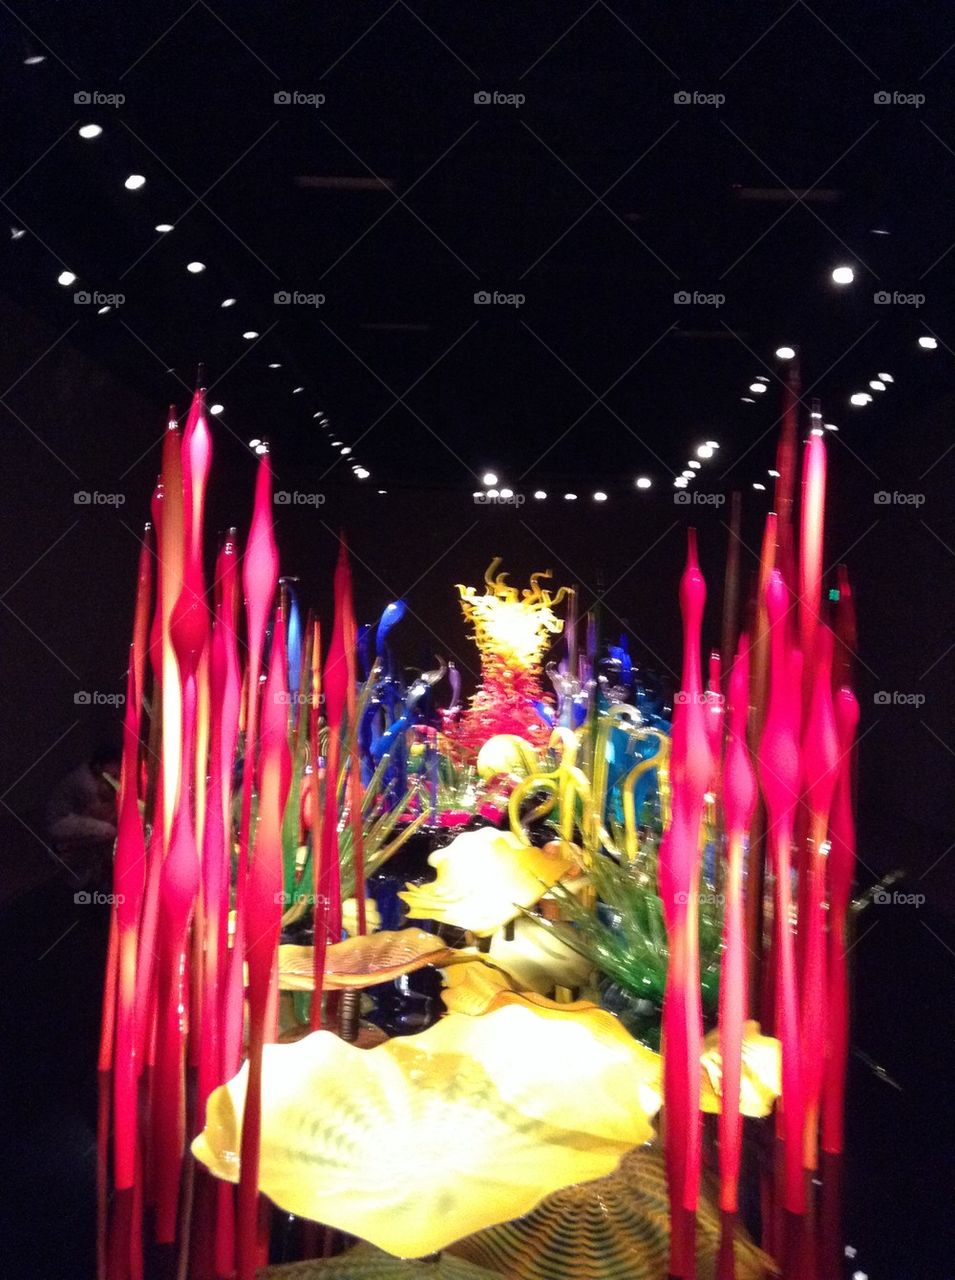 Chihuly glass